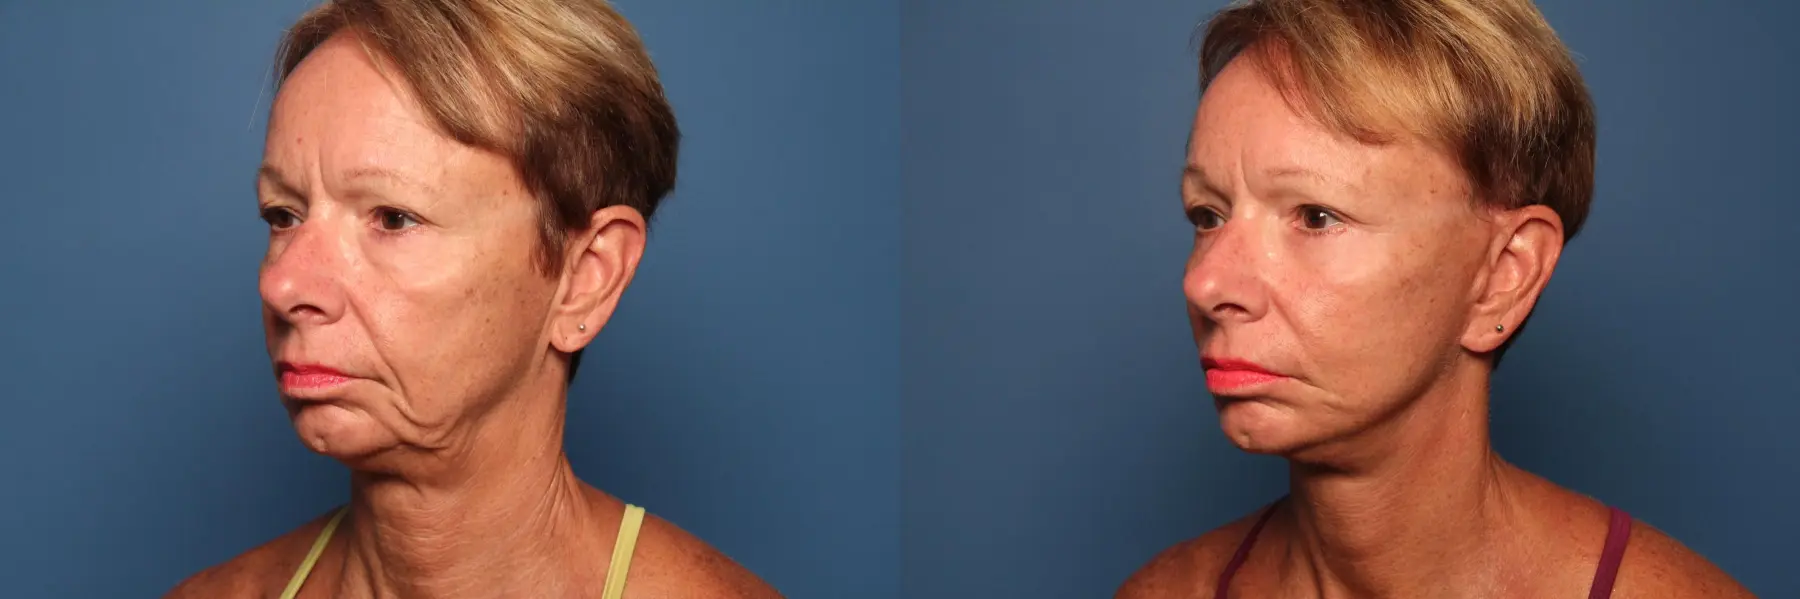 Mini Facelift: Patient 4 - Before and After 2